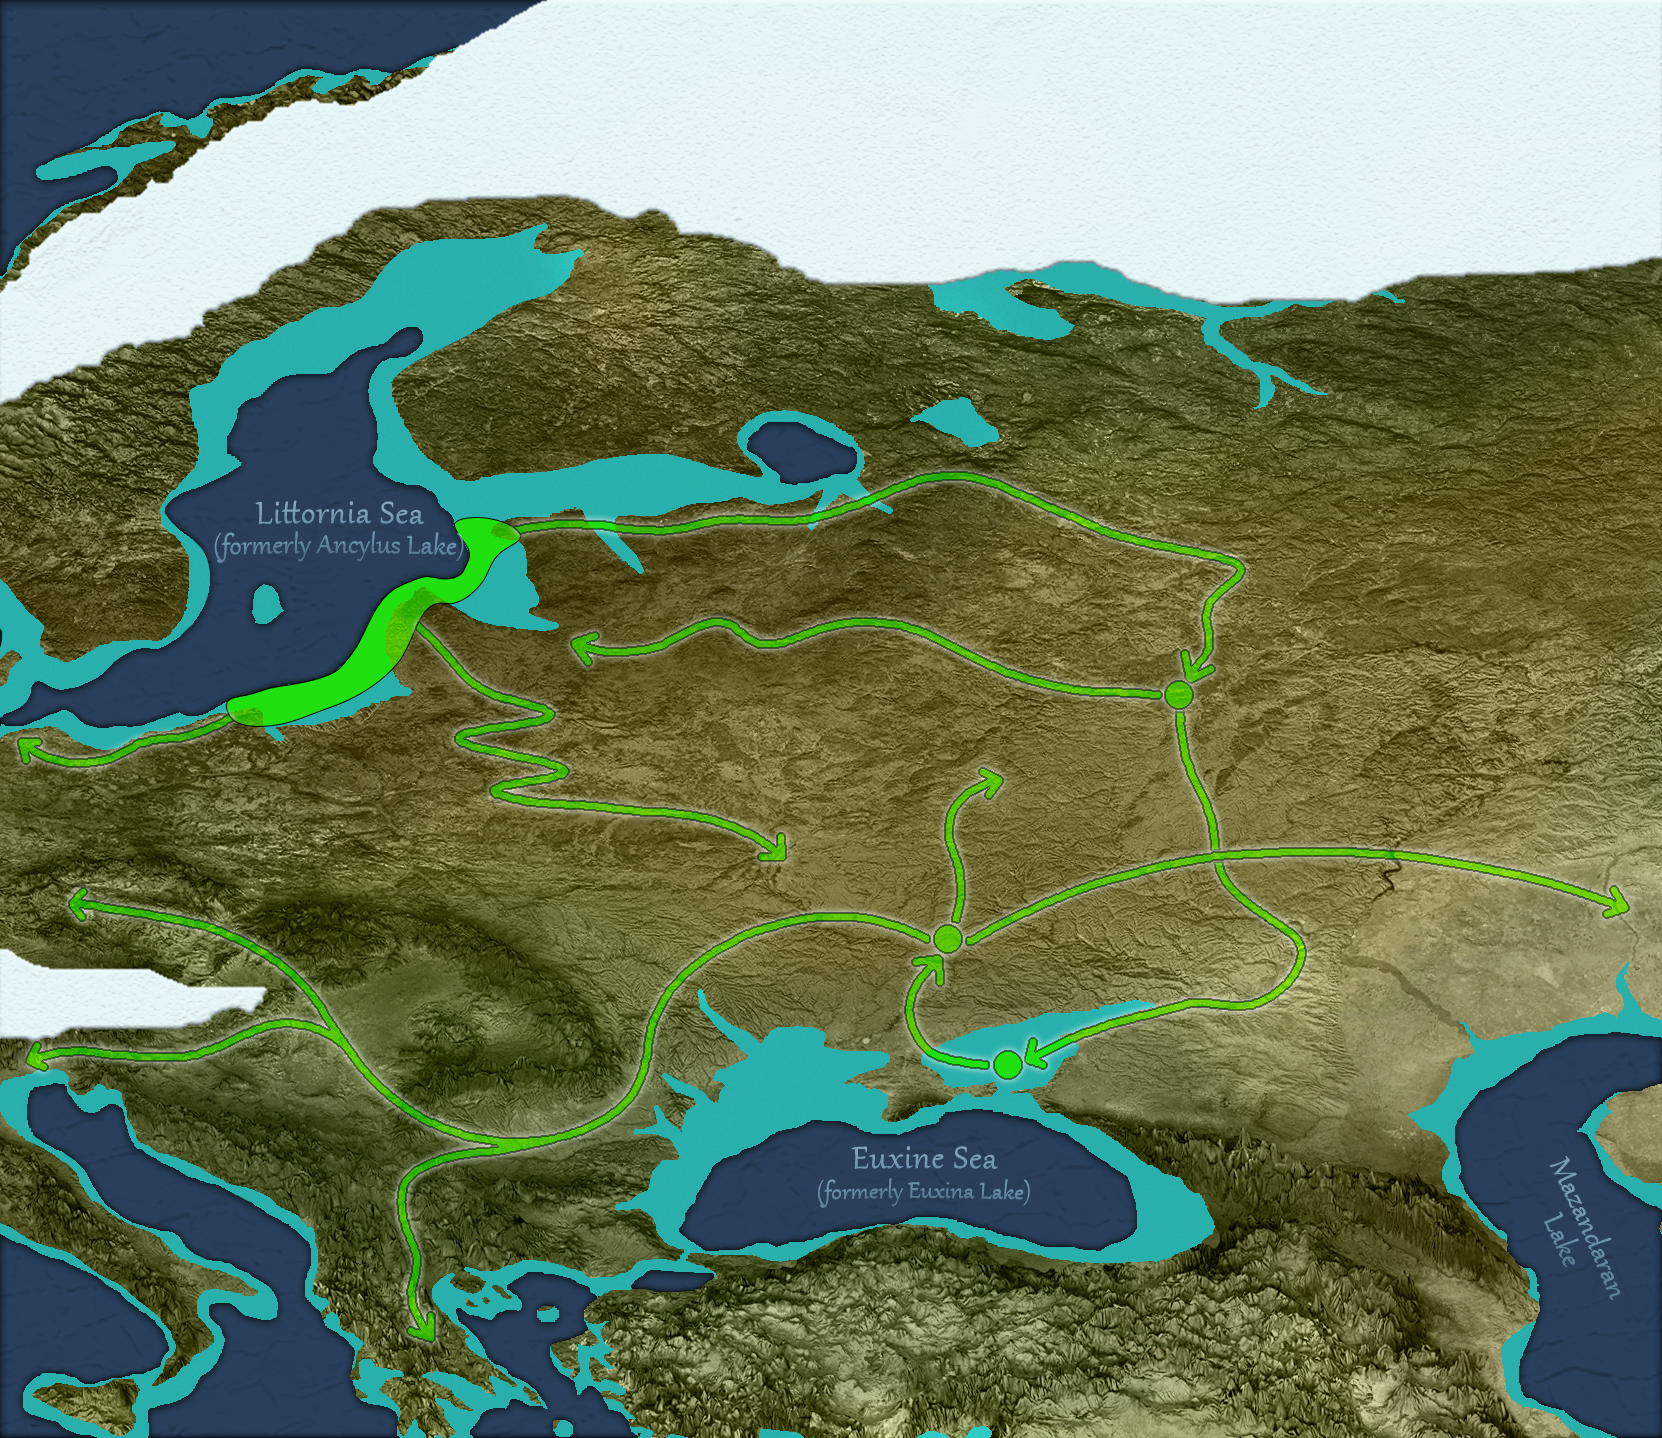 Migration history of the Yék language family